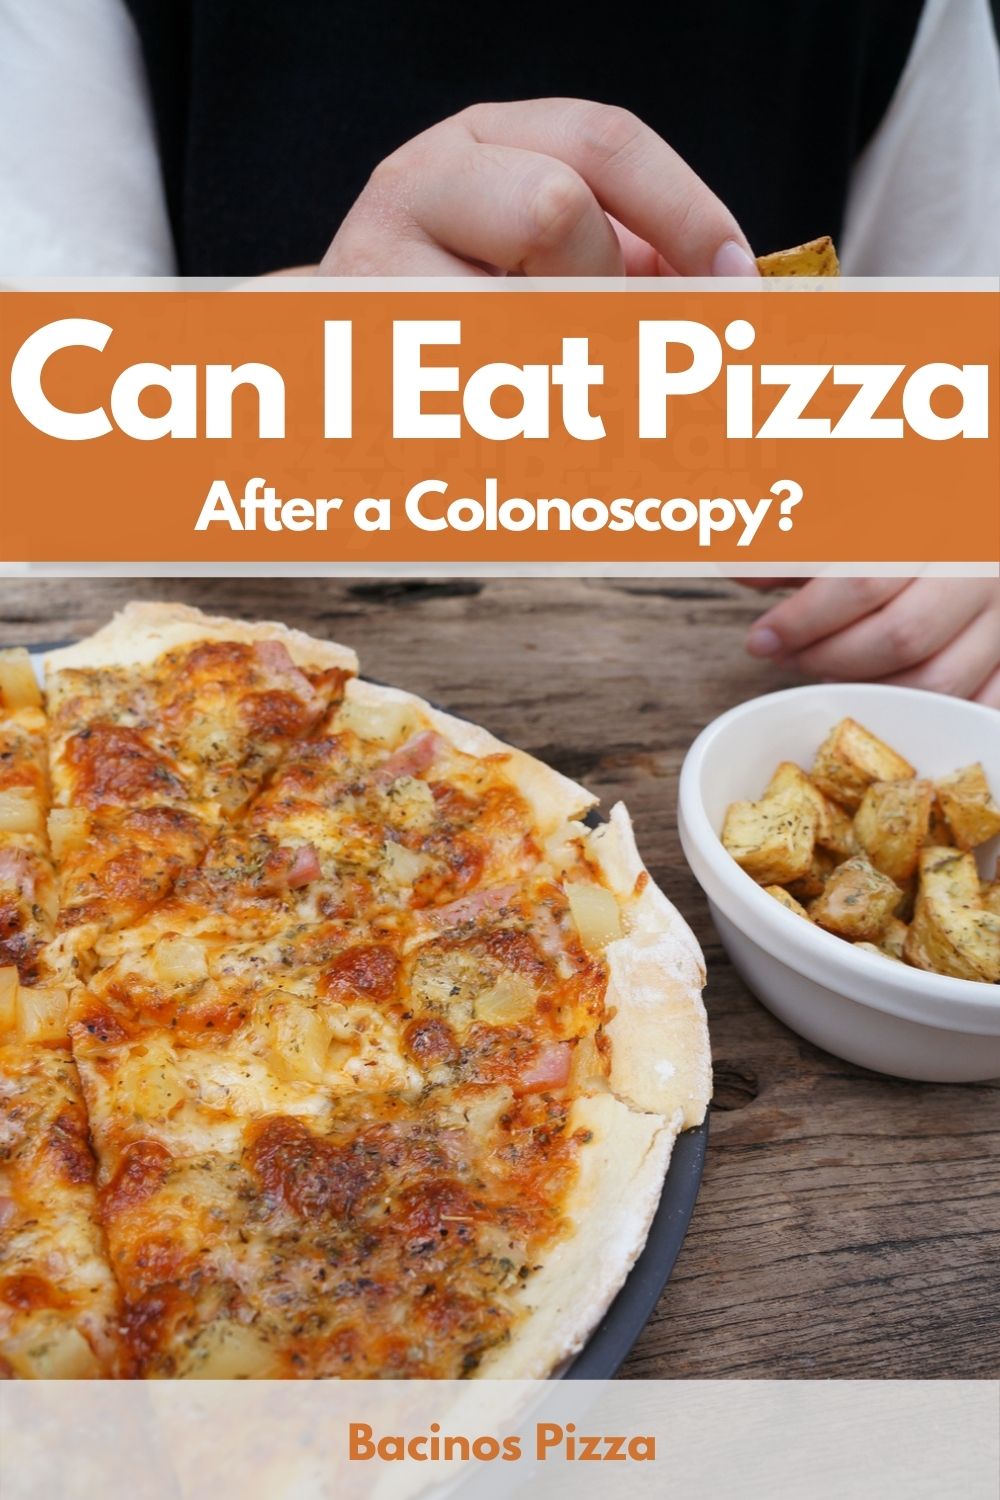 Can I Eat Pizza After a Colonoscopy pin 2